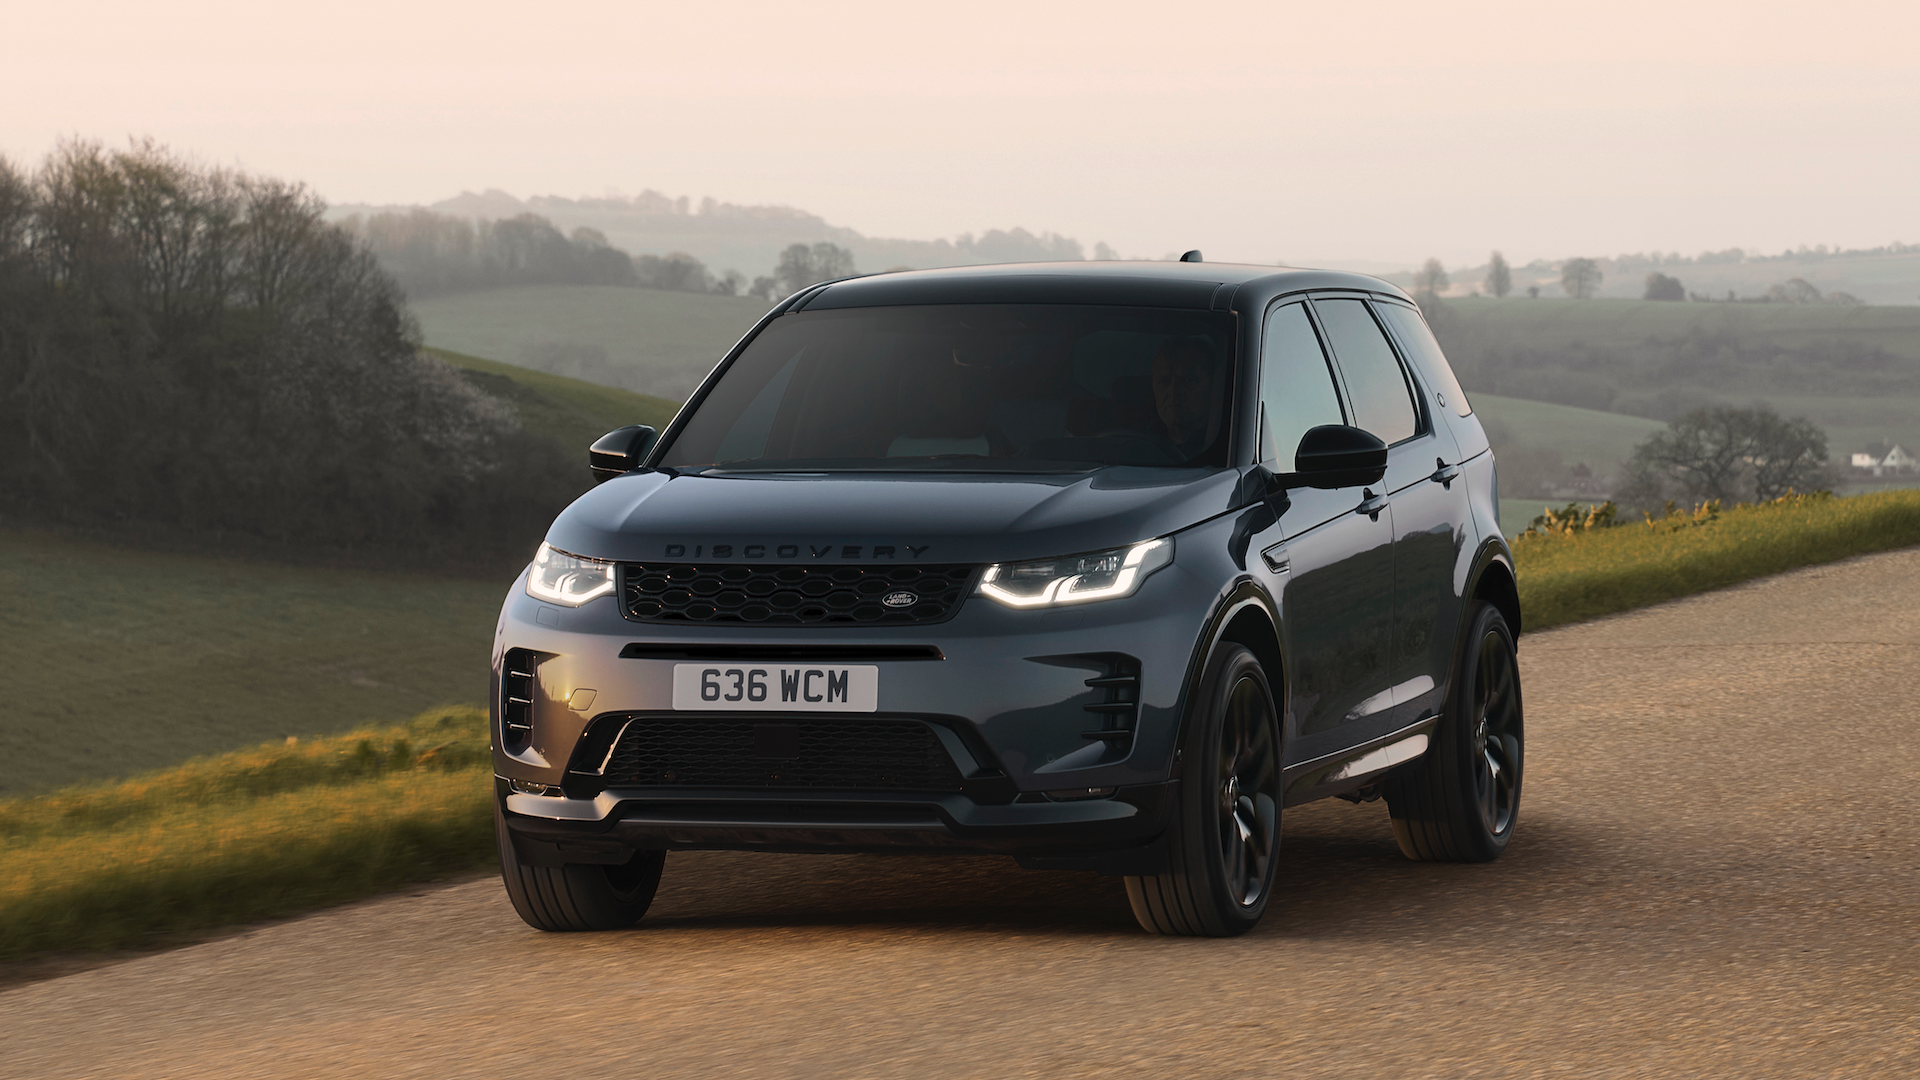 The Land Rover Buying Guide: Every Model, Explained